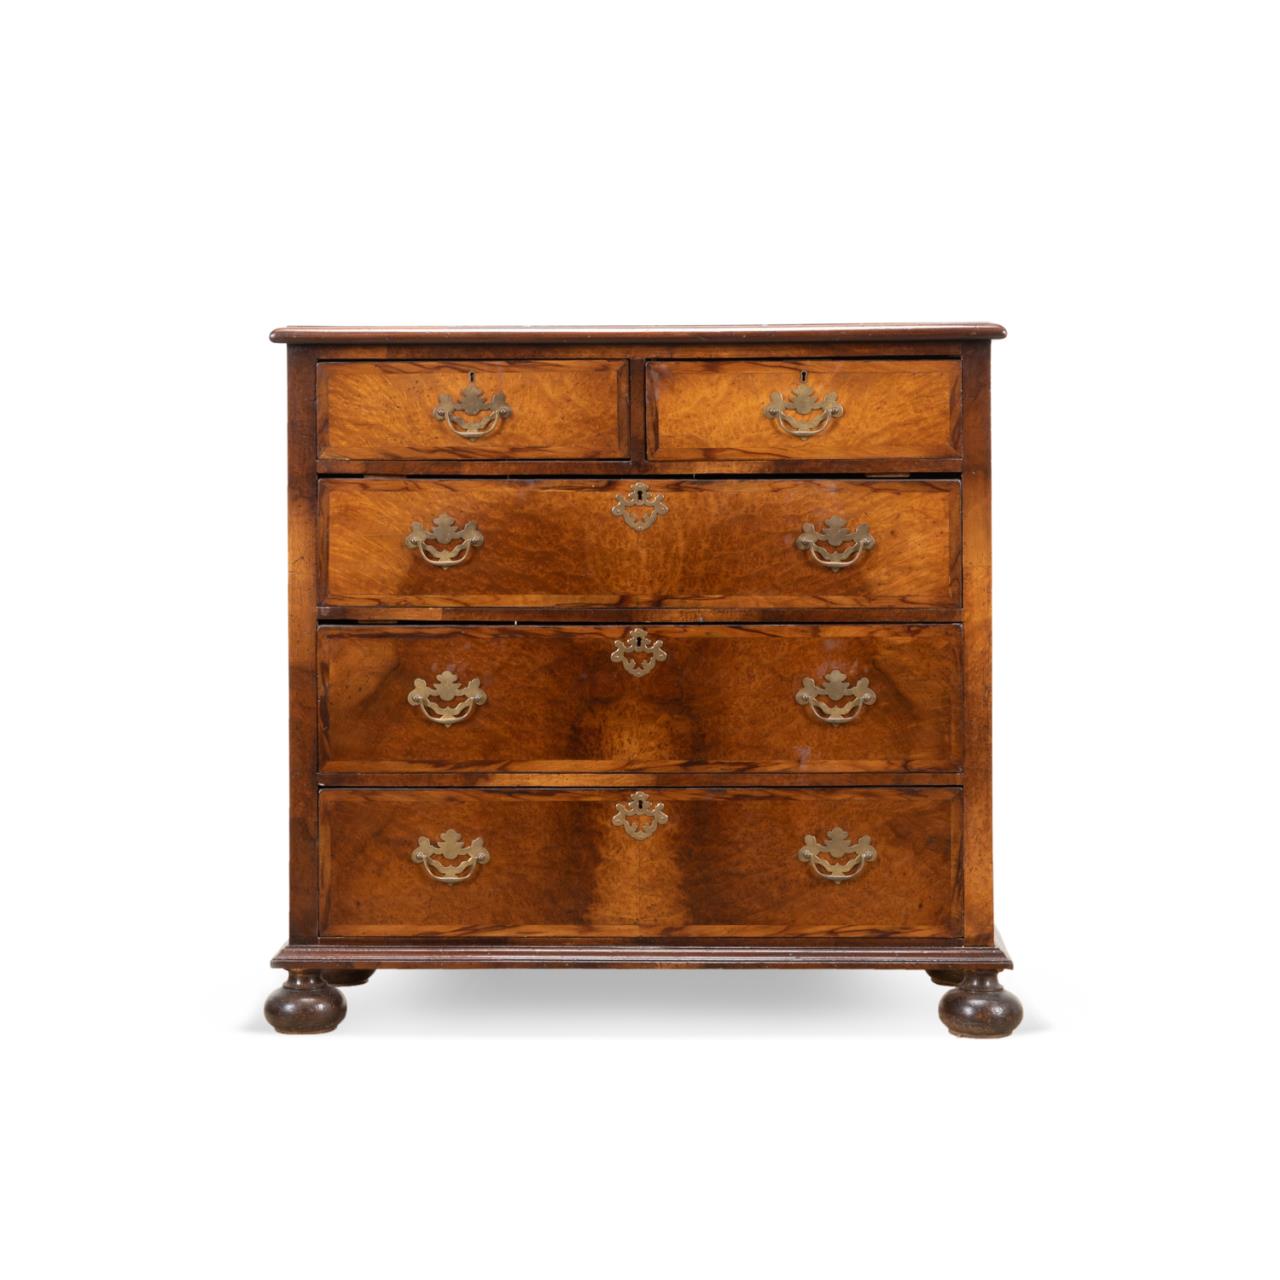 WILLIAM MARY STYLE FIVE DRAWER 354cce